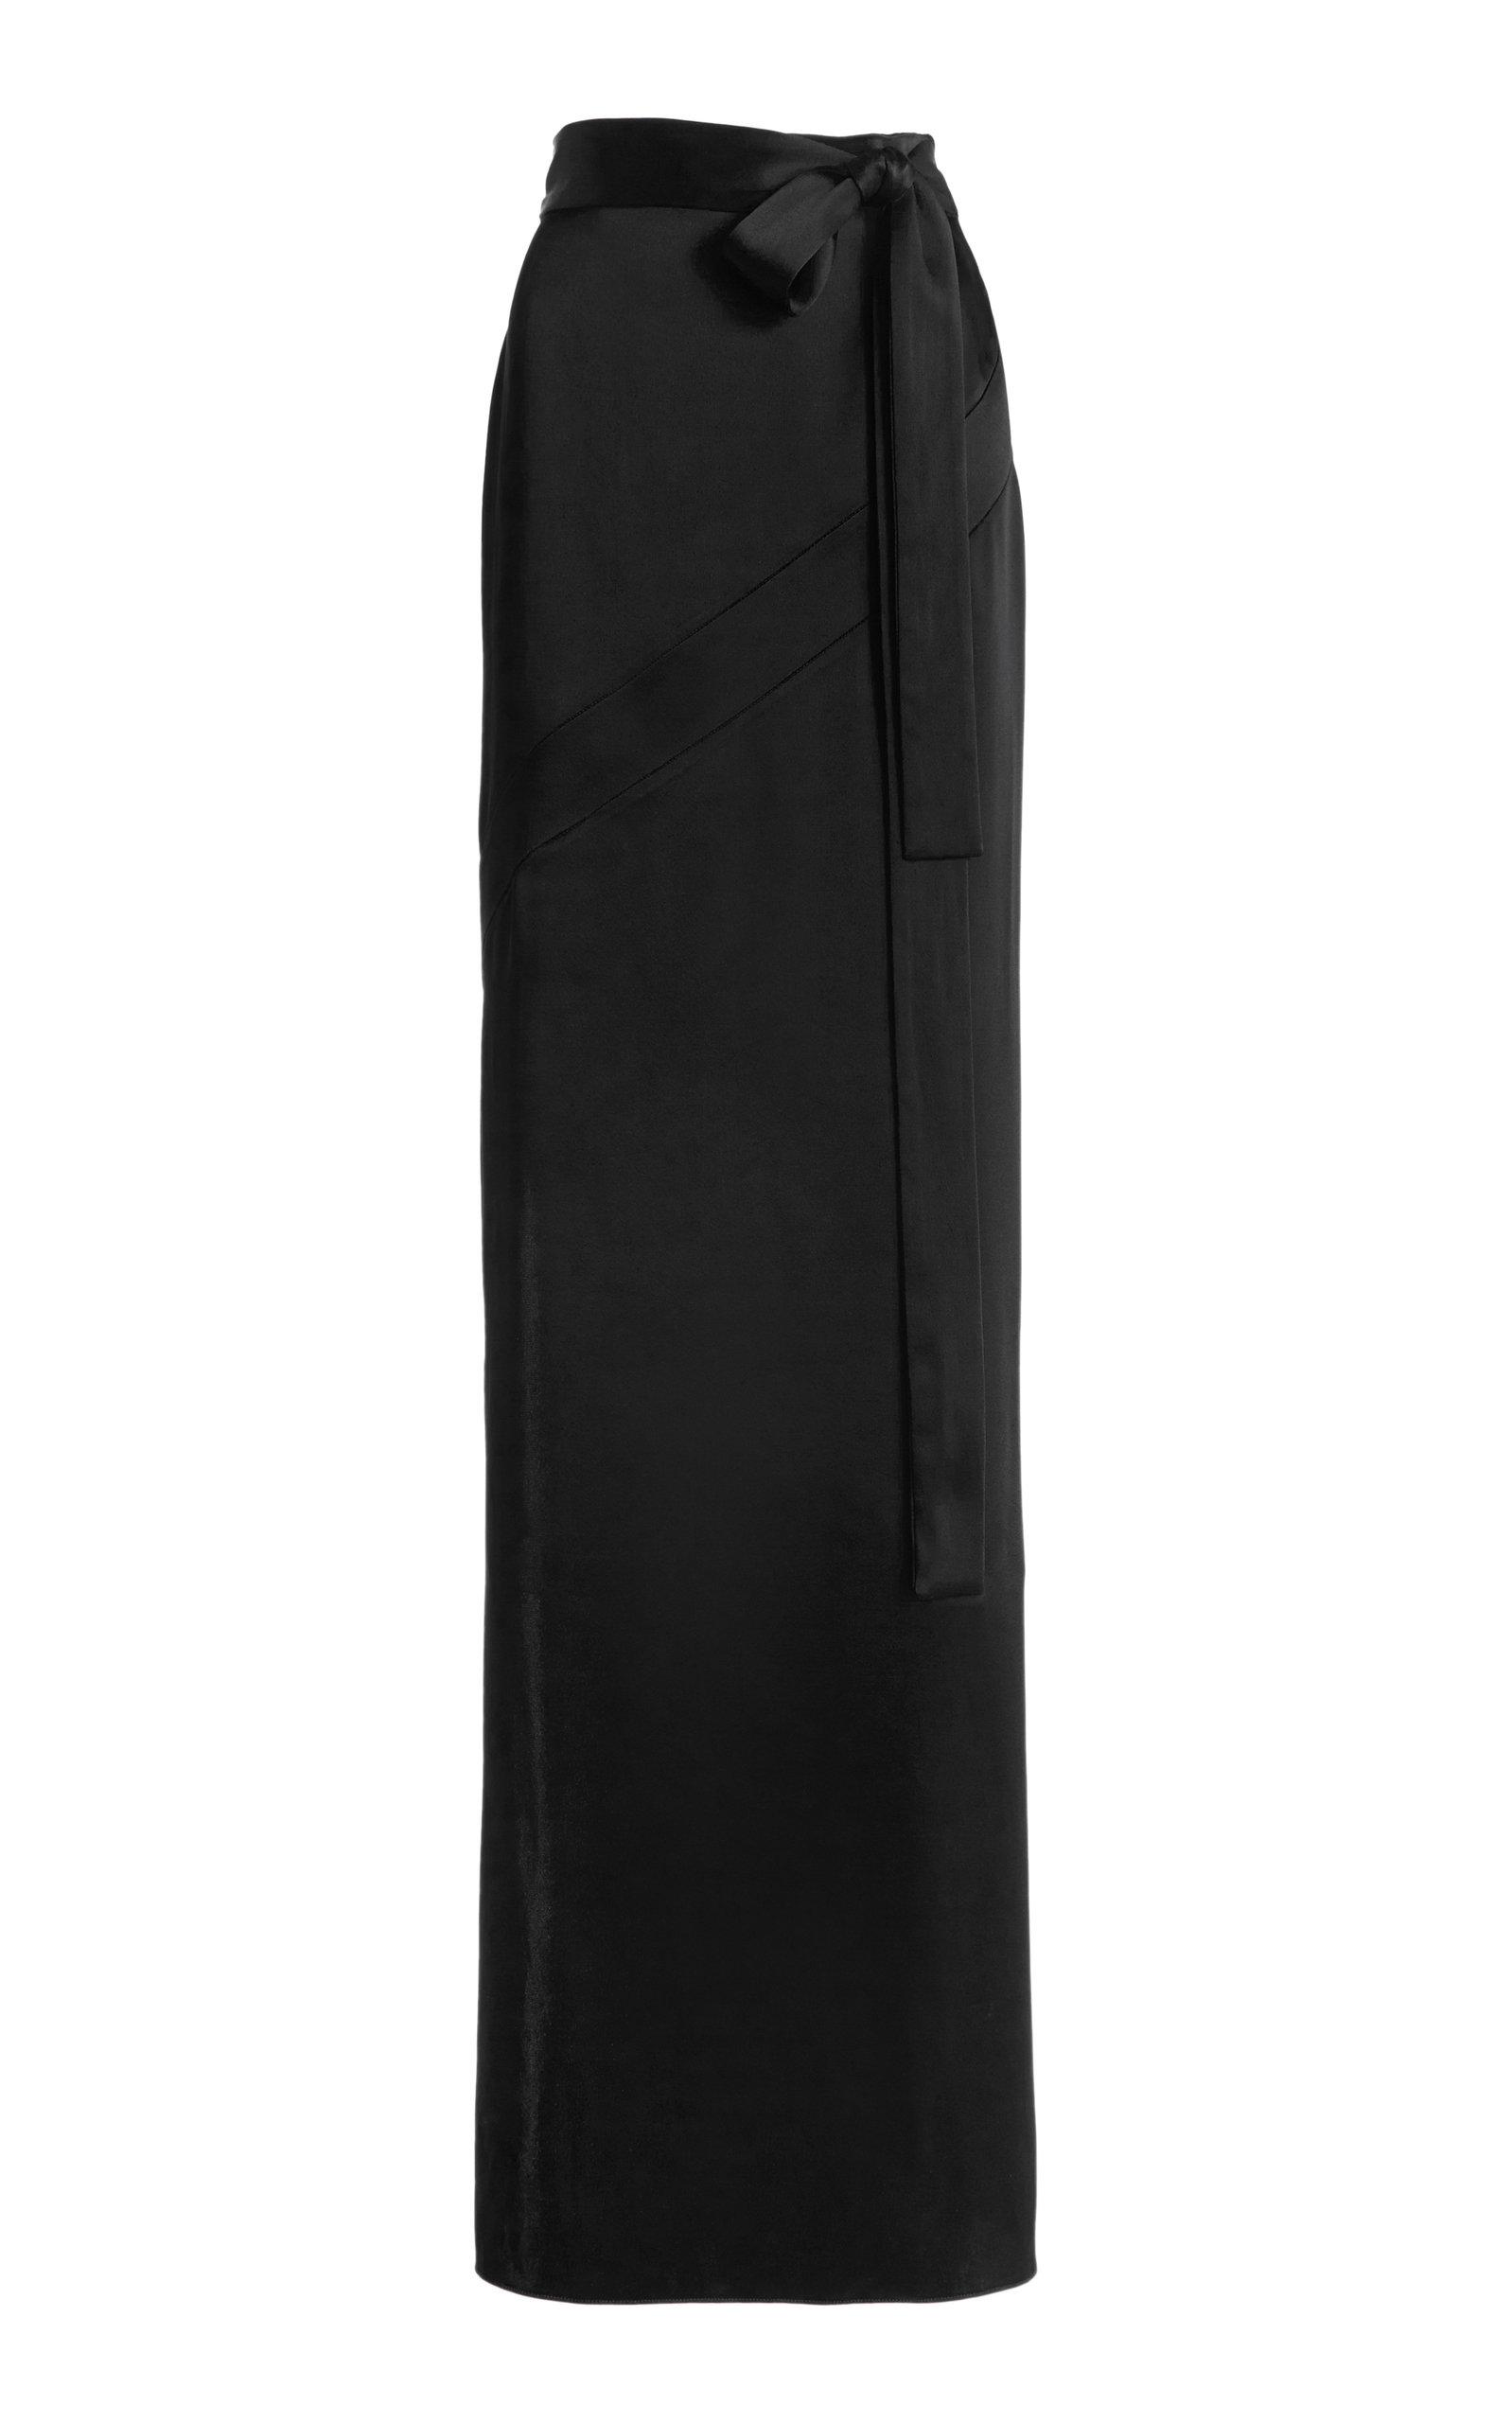 Tom Ford Double-faced Satin Maxi Skirt in Black | Lyst